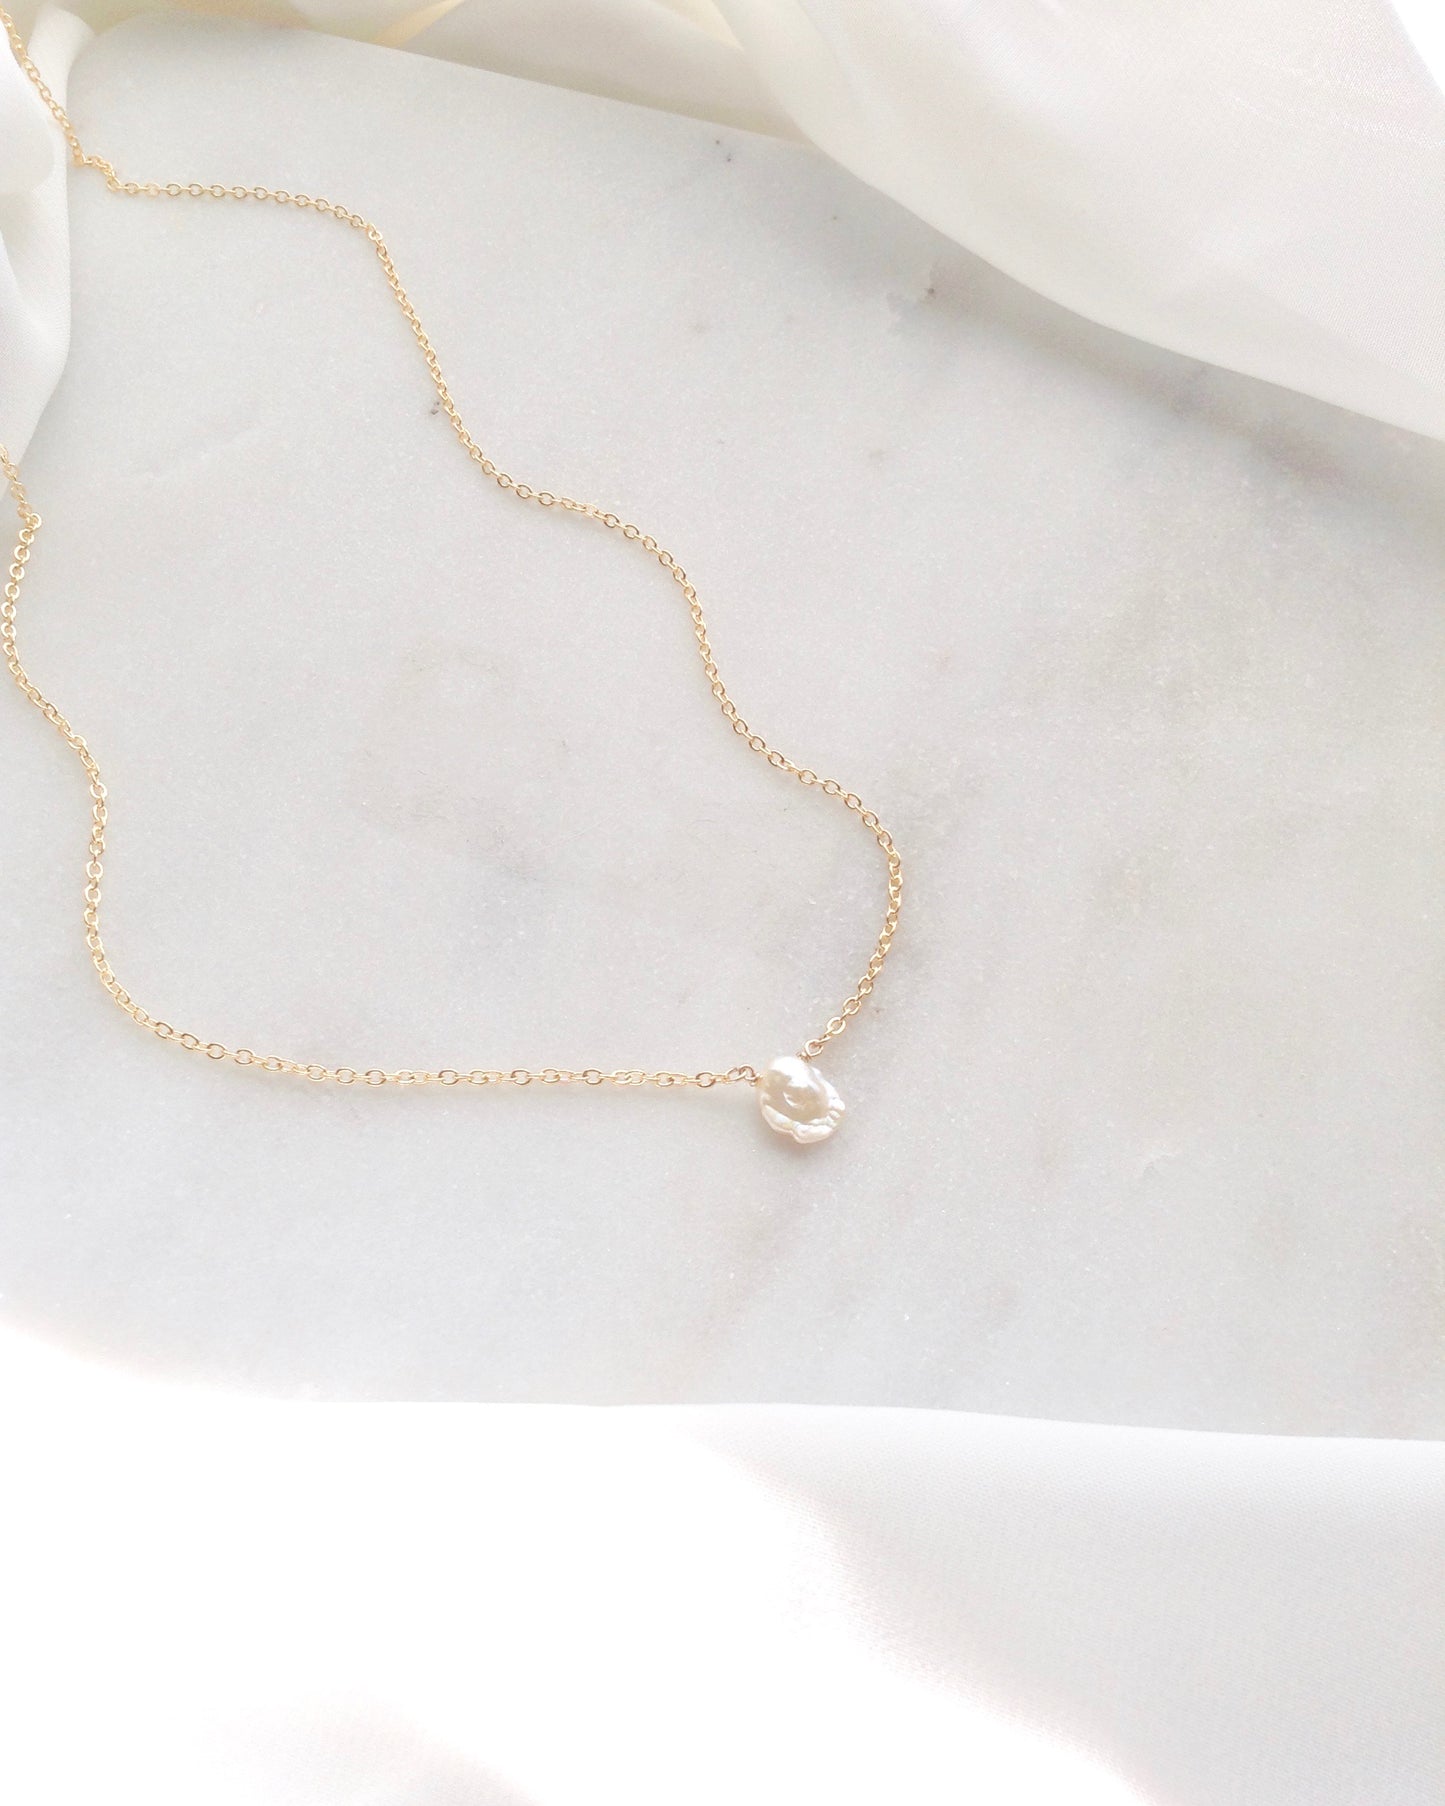 Keshi Single Pearl Necklace in Gold Filled or Sterling Silver | IB Jewelry